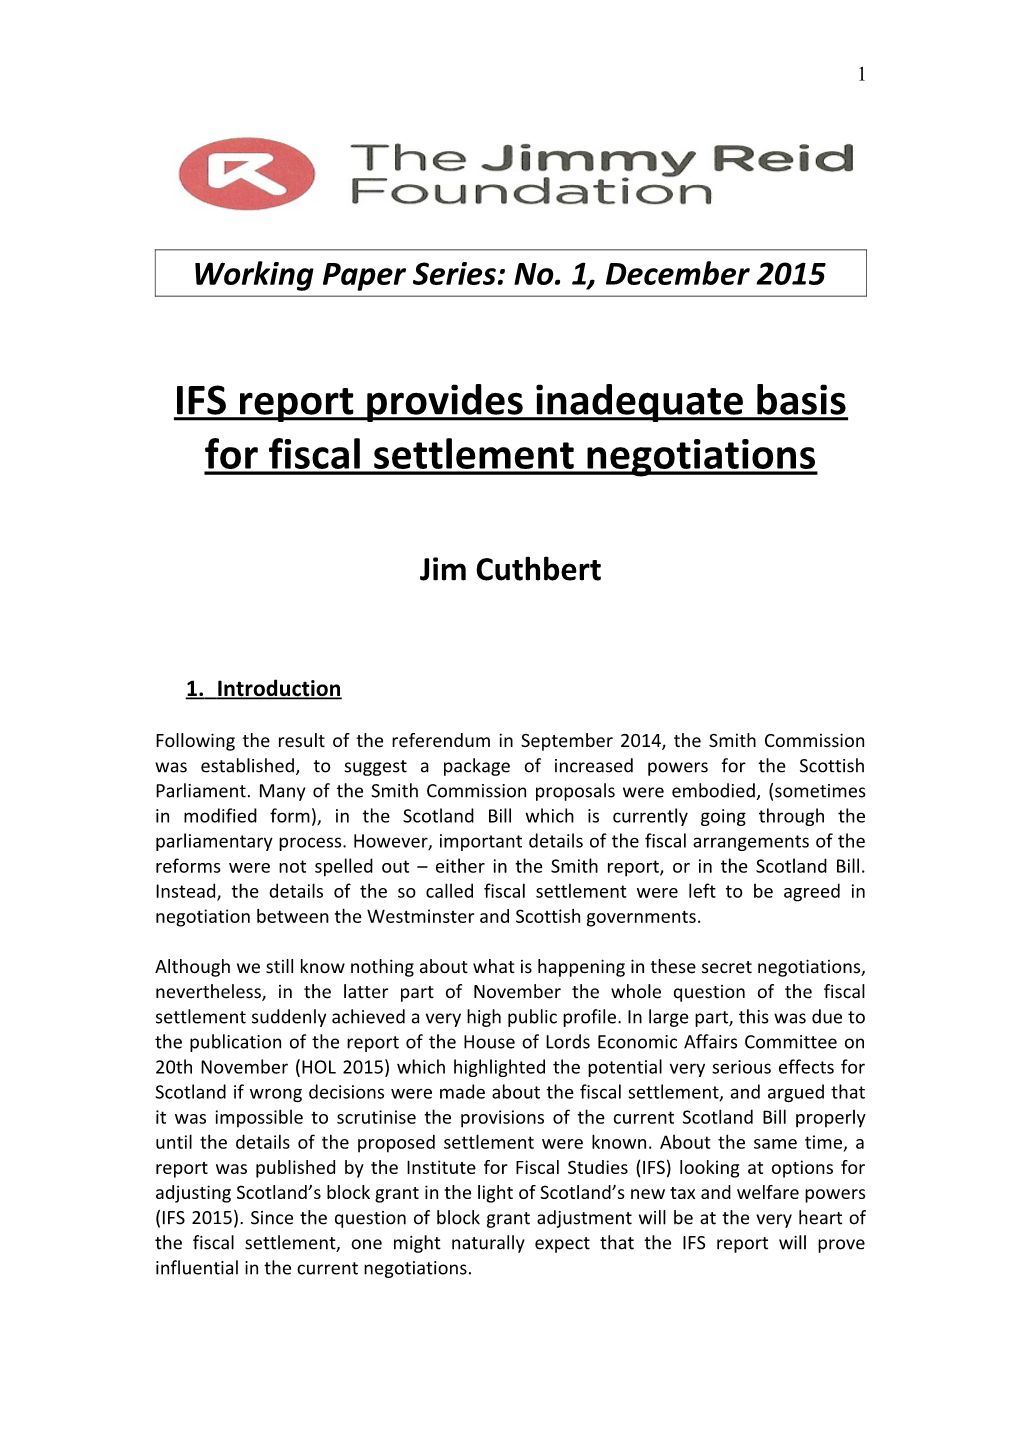 IFS Report Provides an Inadequate Basis for Fiscal Settlement Negotiations